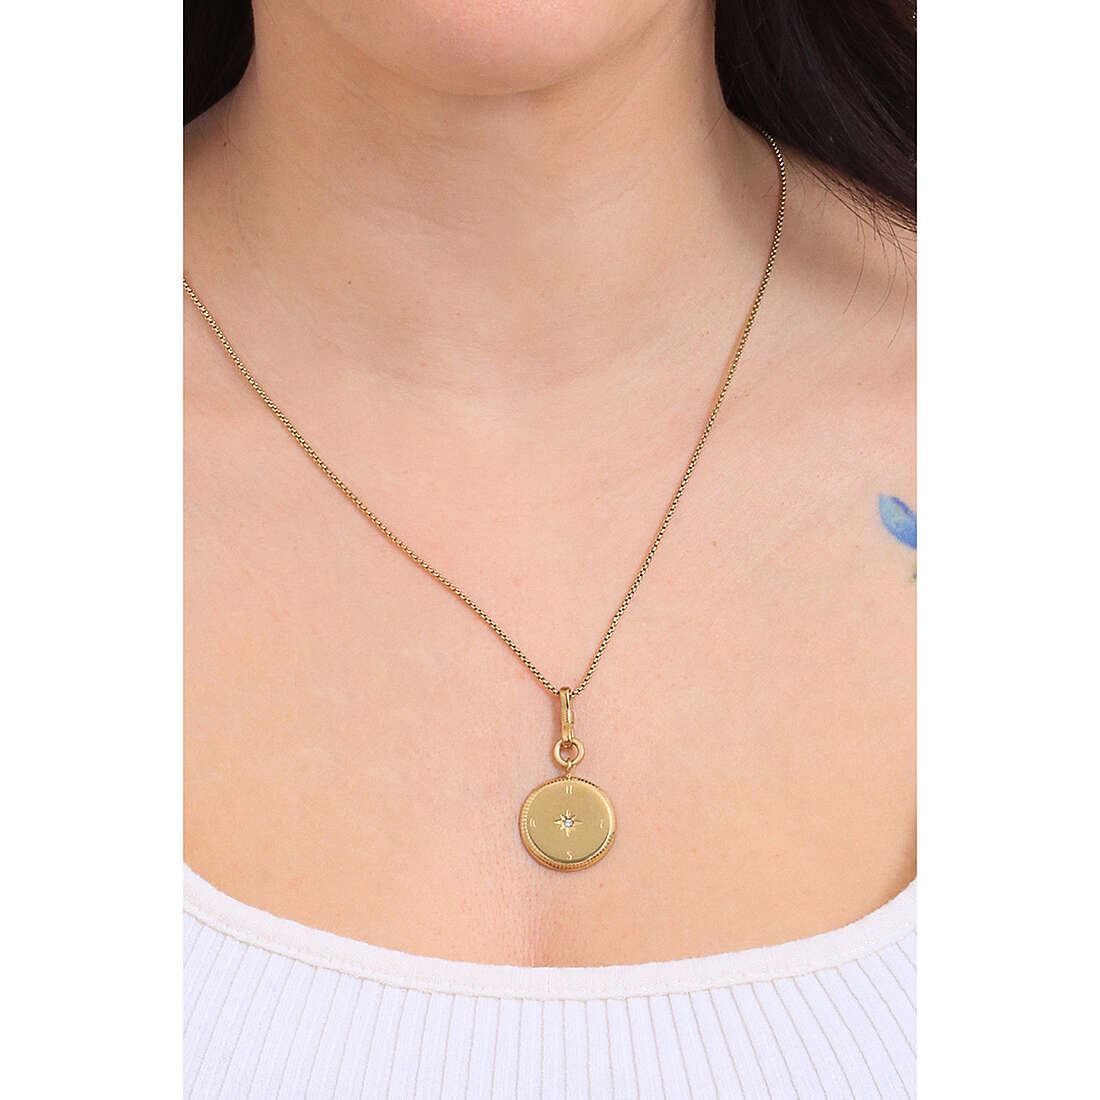 Fossil necklaces Georgia woman JF03934710 wearing